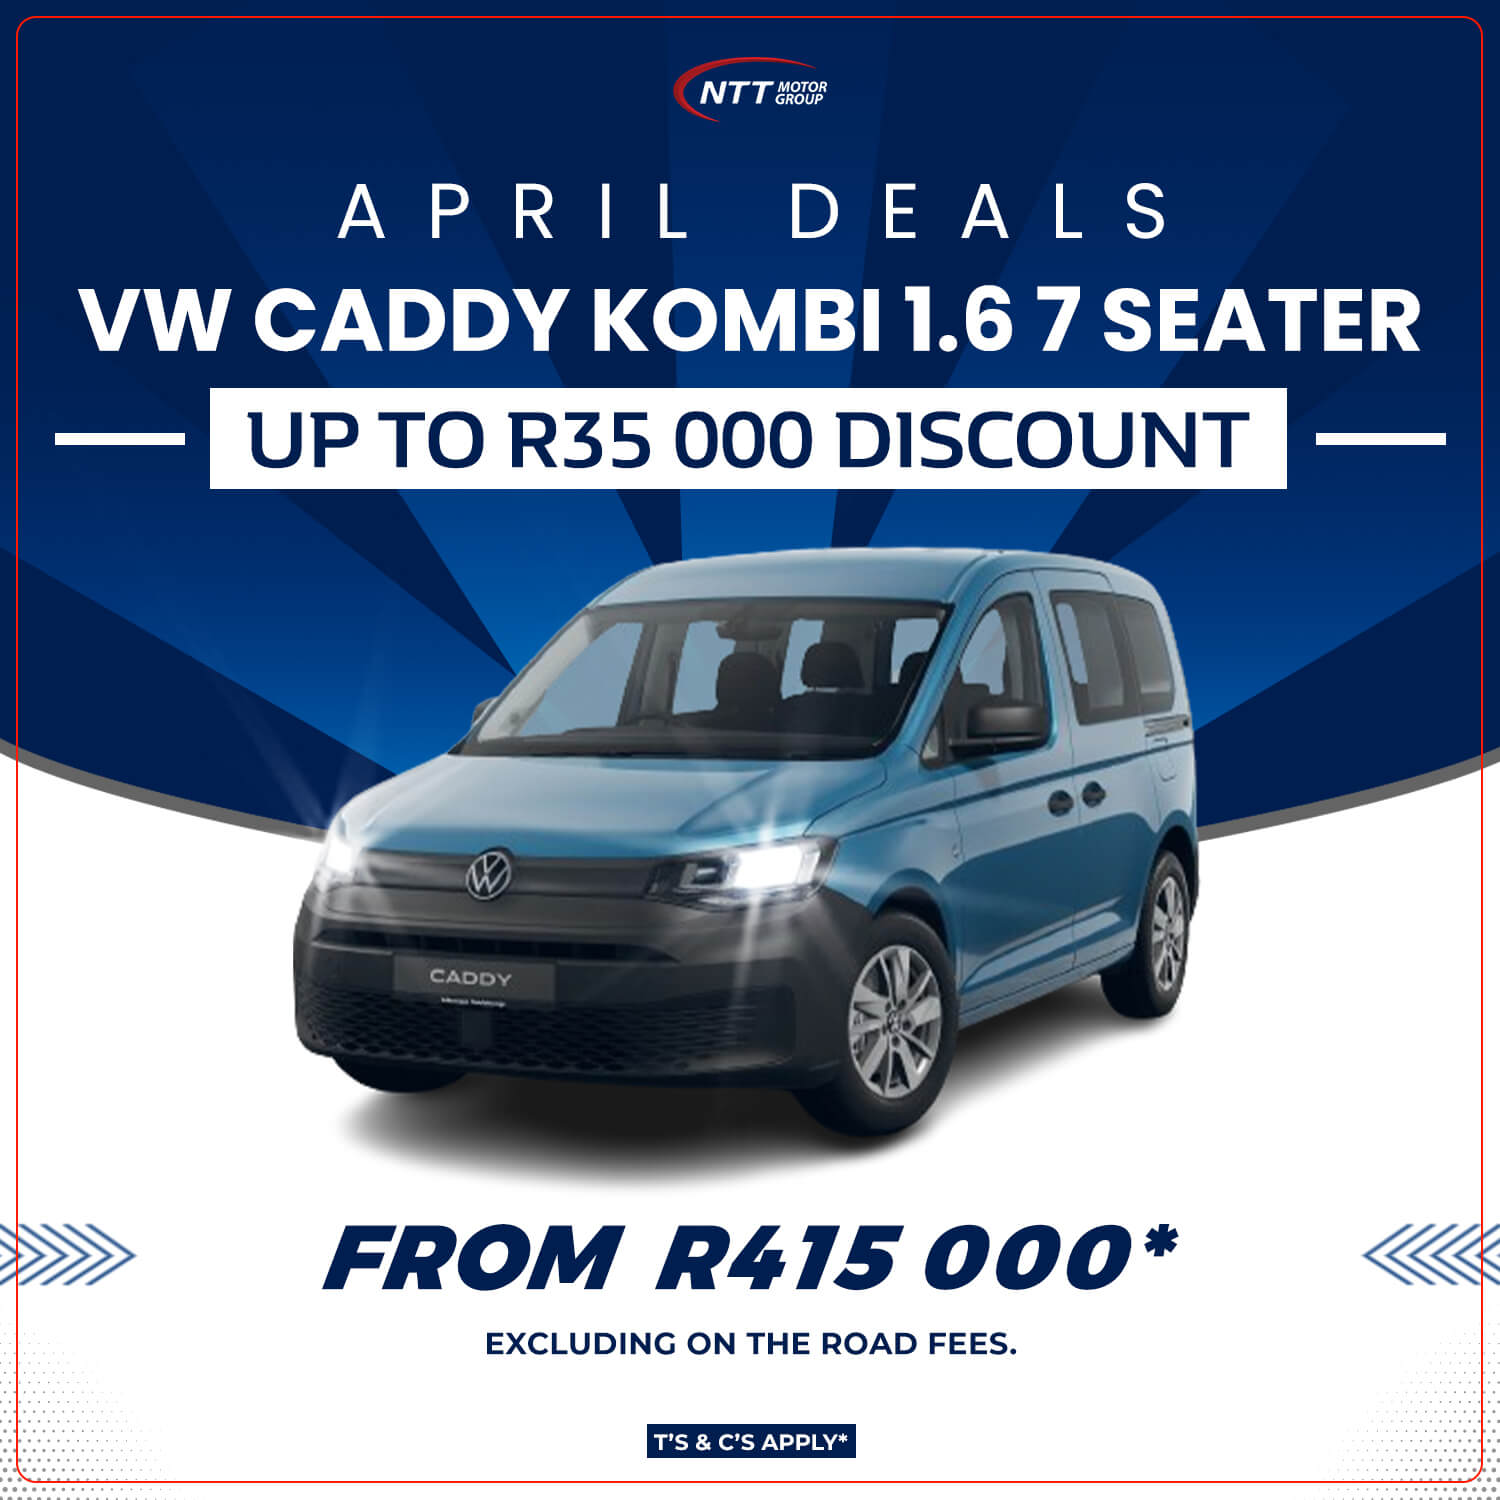 VW CADDY KOMBI 1.6 7 SEATER - NTT Motor Group - Cars for Sale in South Africa